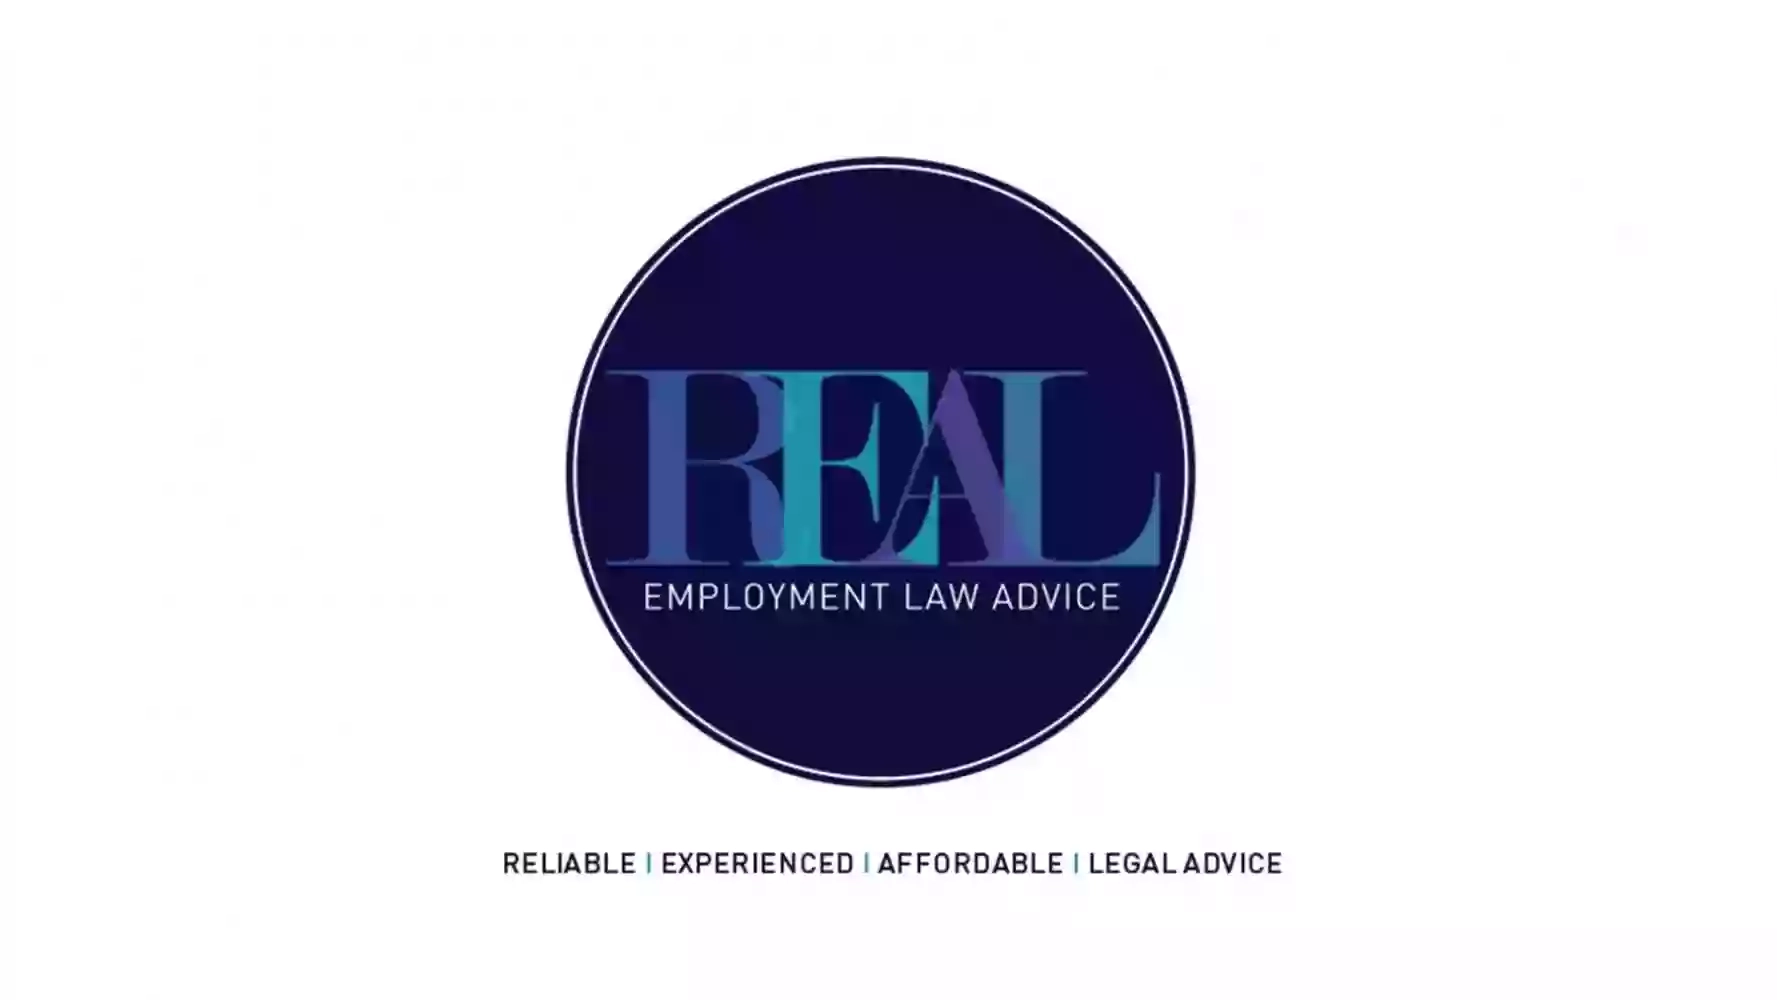 Real Employment Law Advice